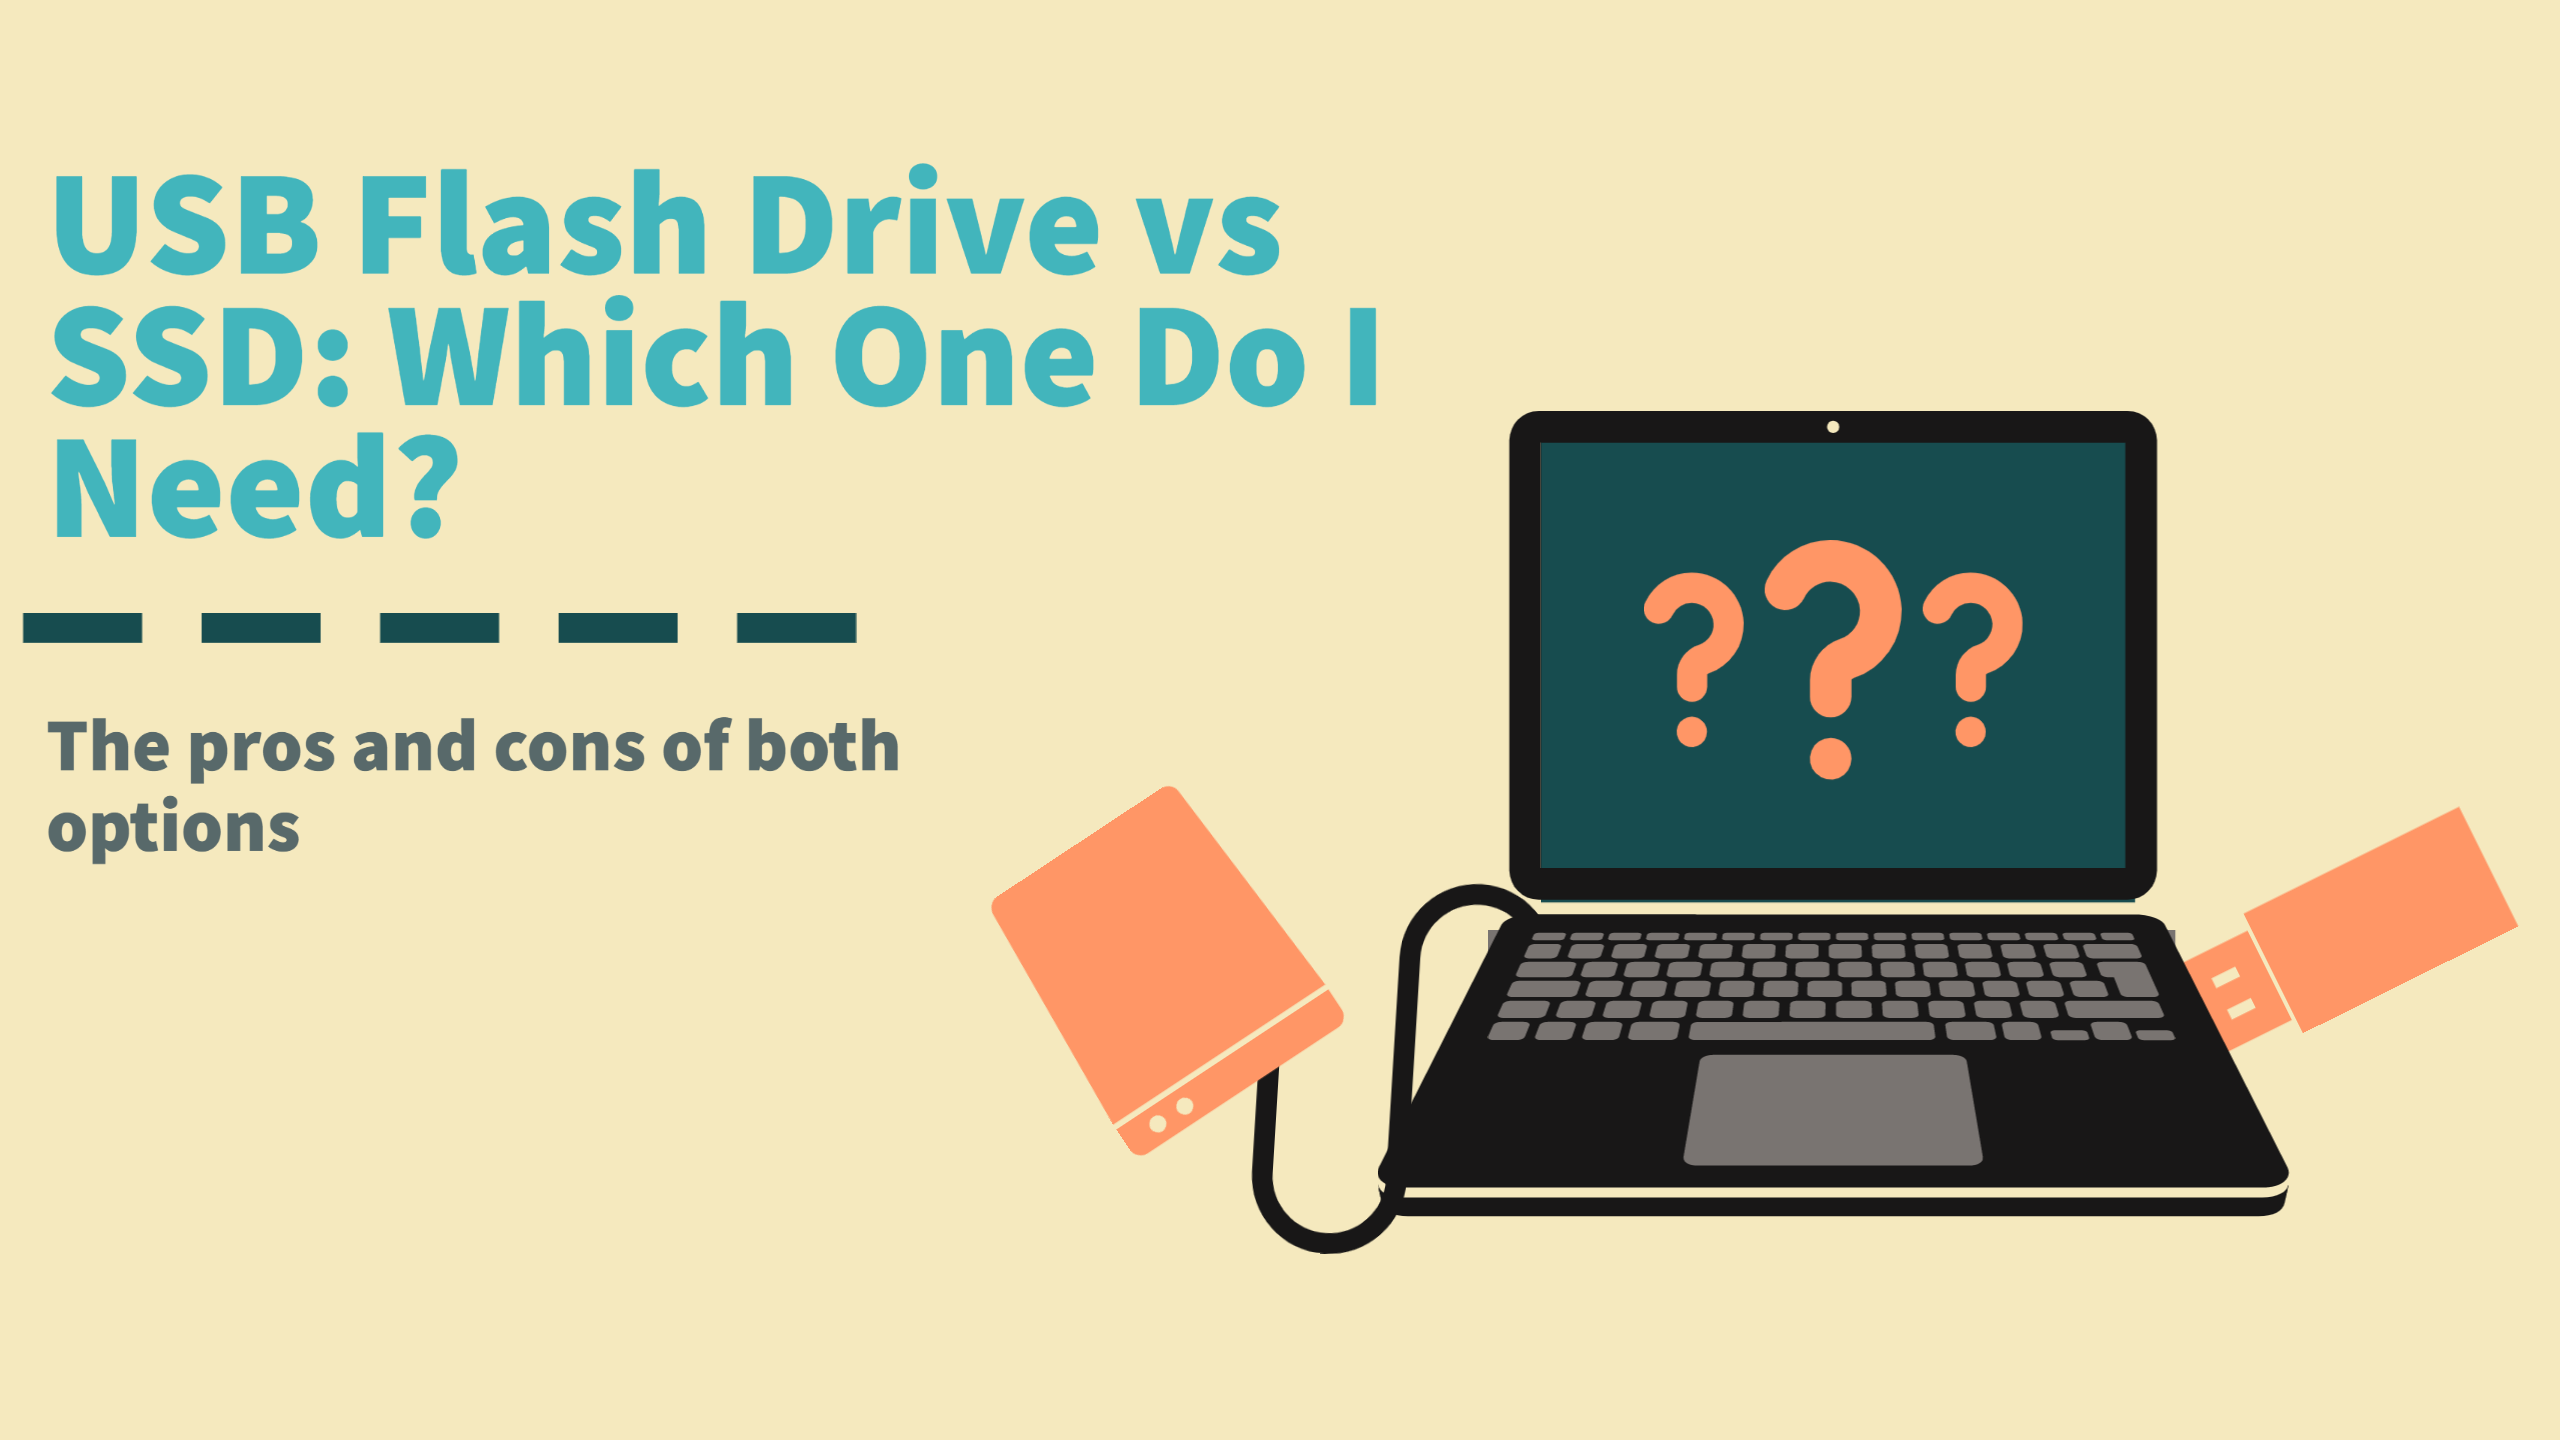 USB Flash Drive vs SSD: What are the differences?